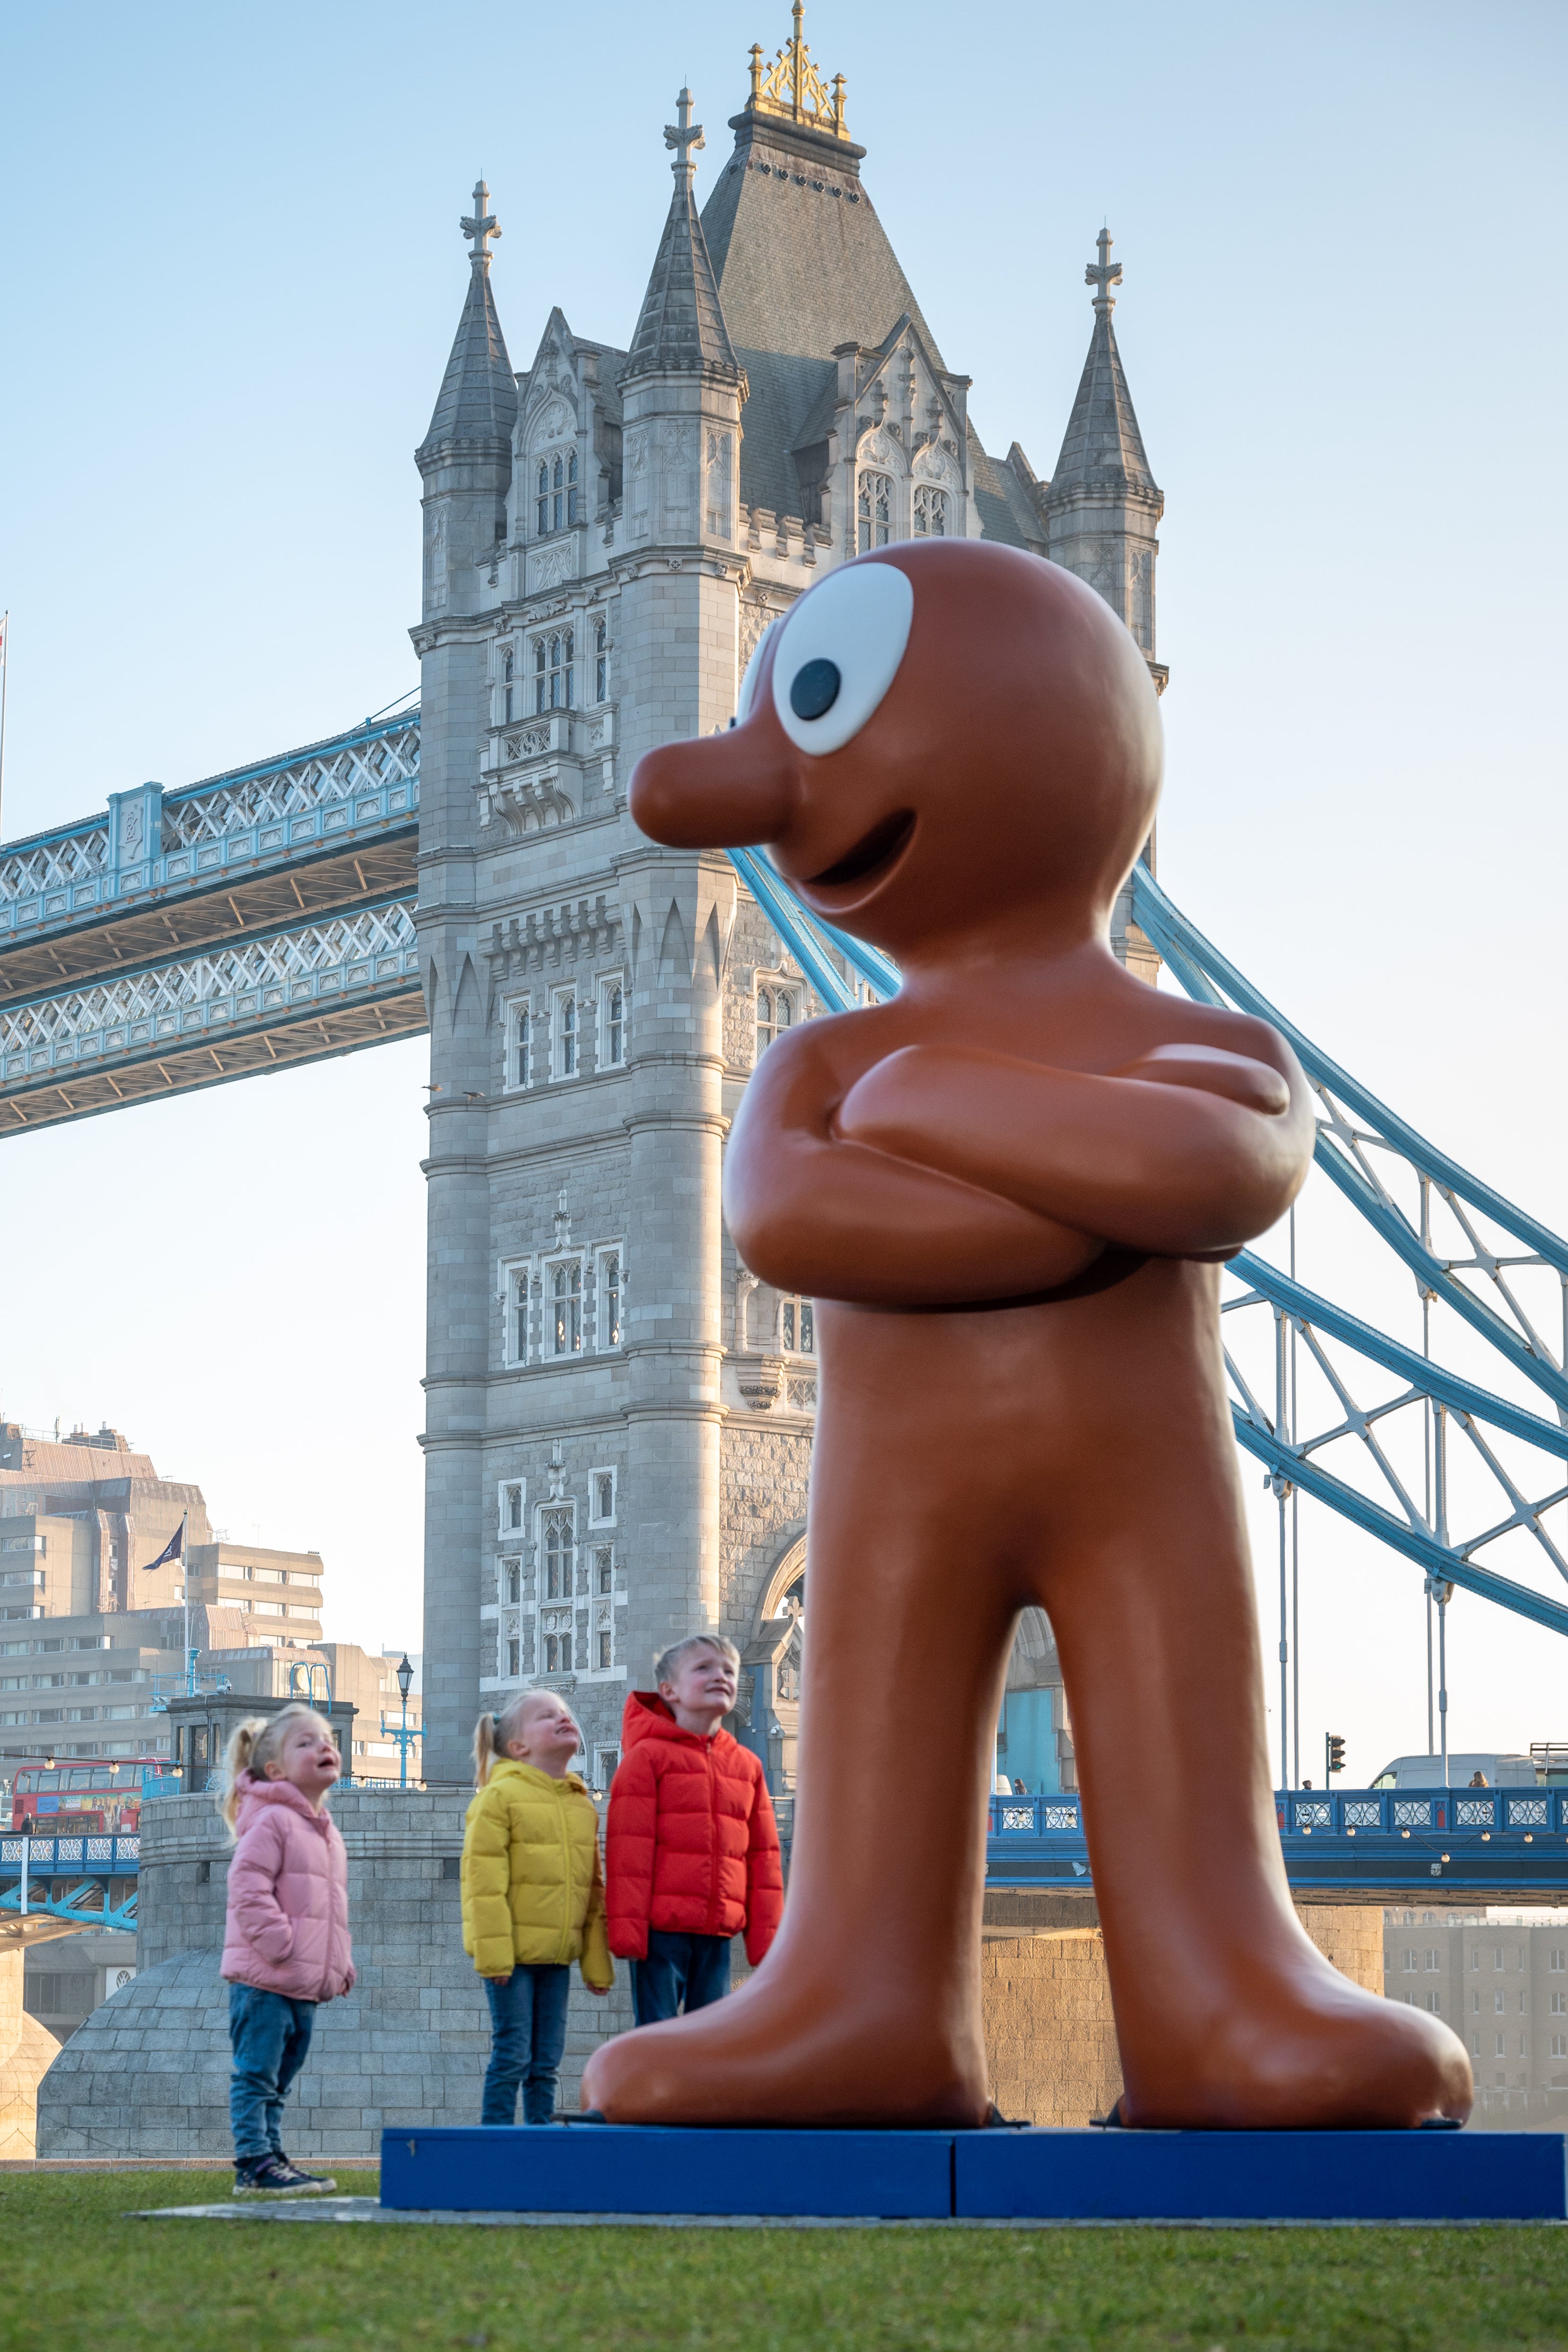 The installation was commissioned by Sky Kids to celebrate the launch of its 24-hour channel